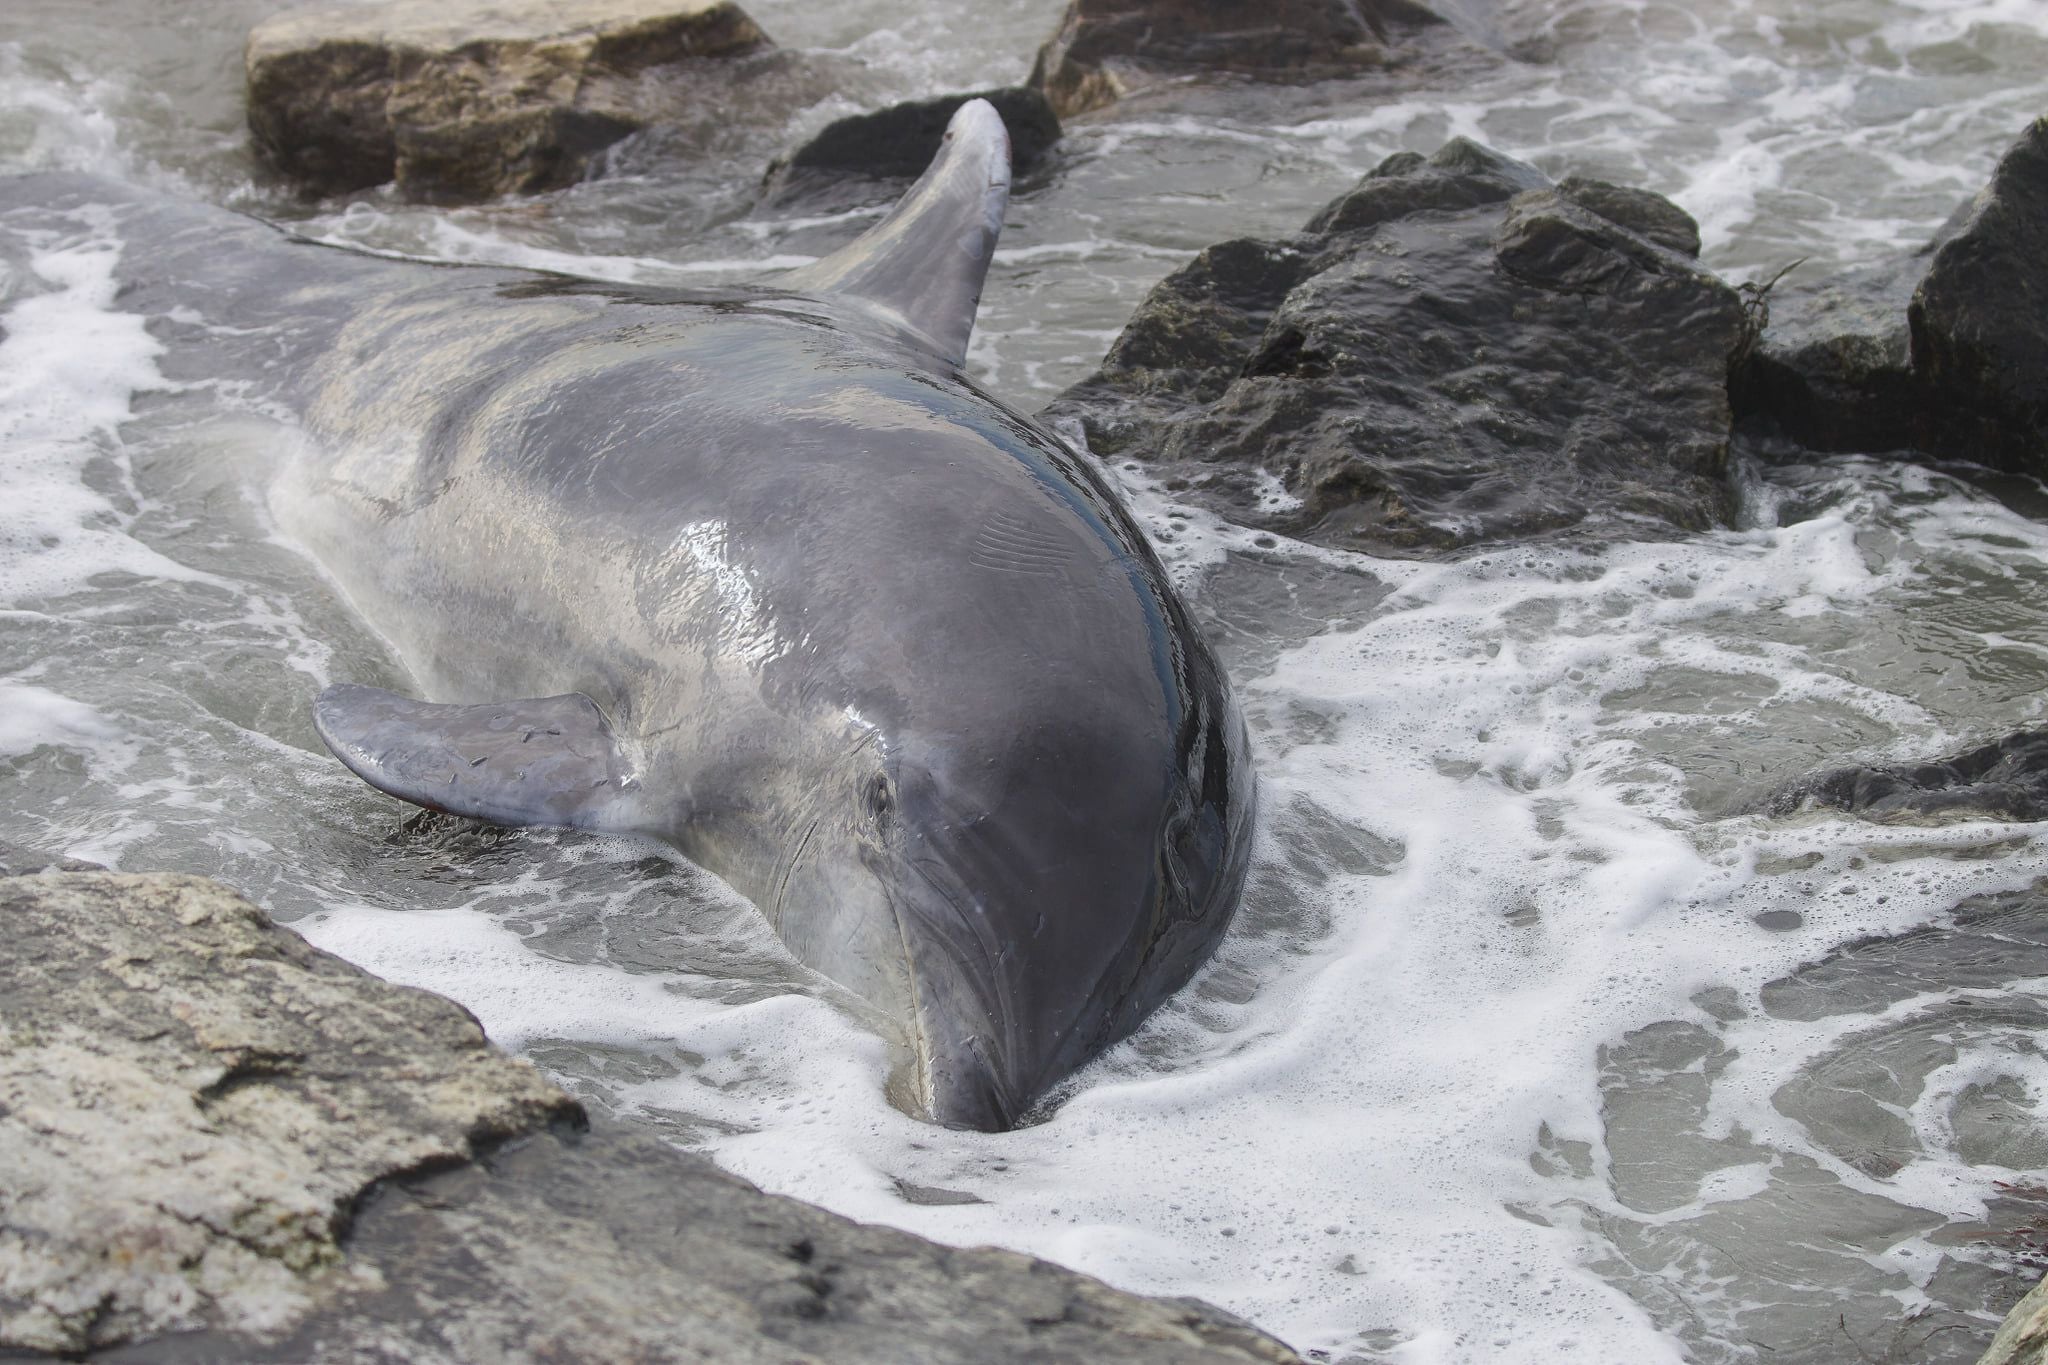 Researchers: Dolphins found dead were stranded during Sally